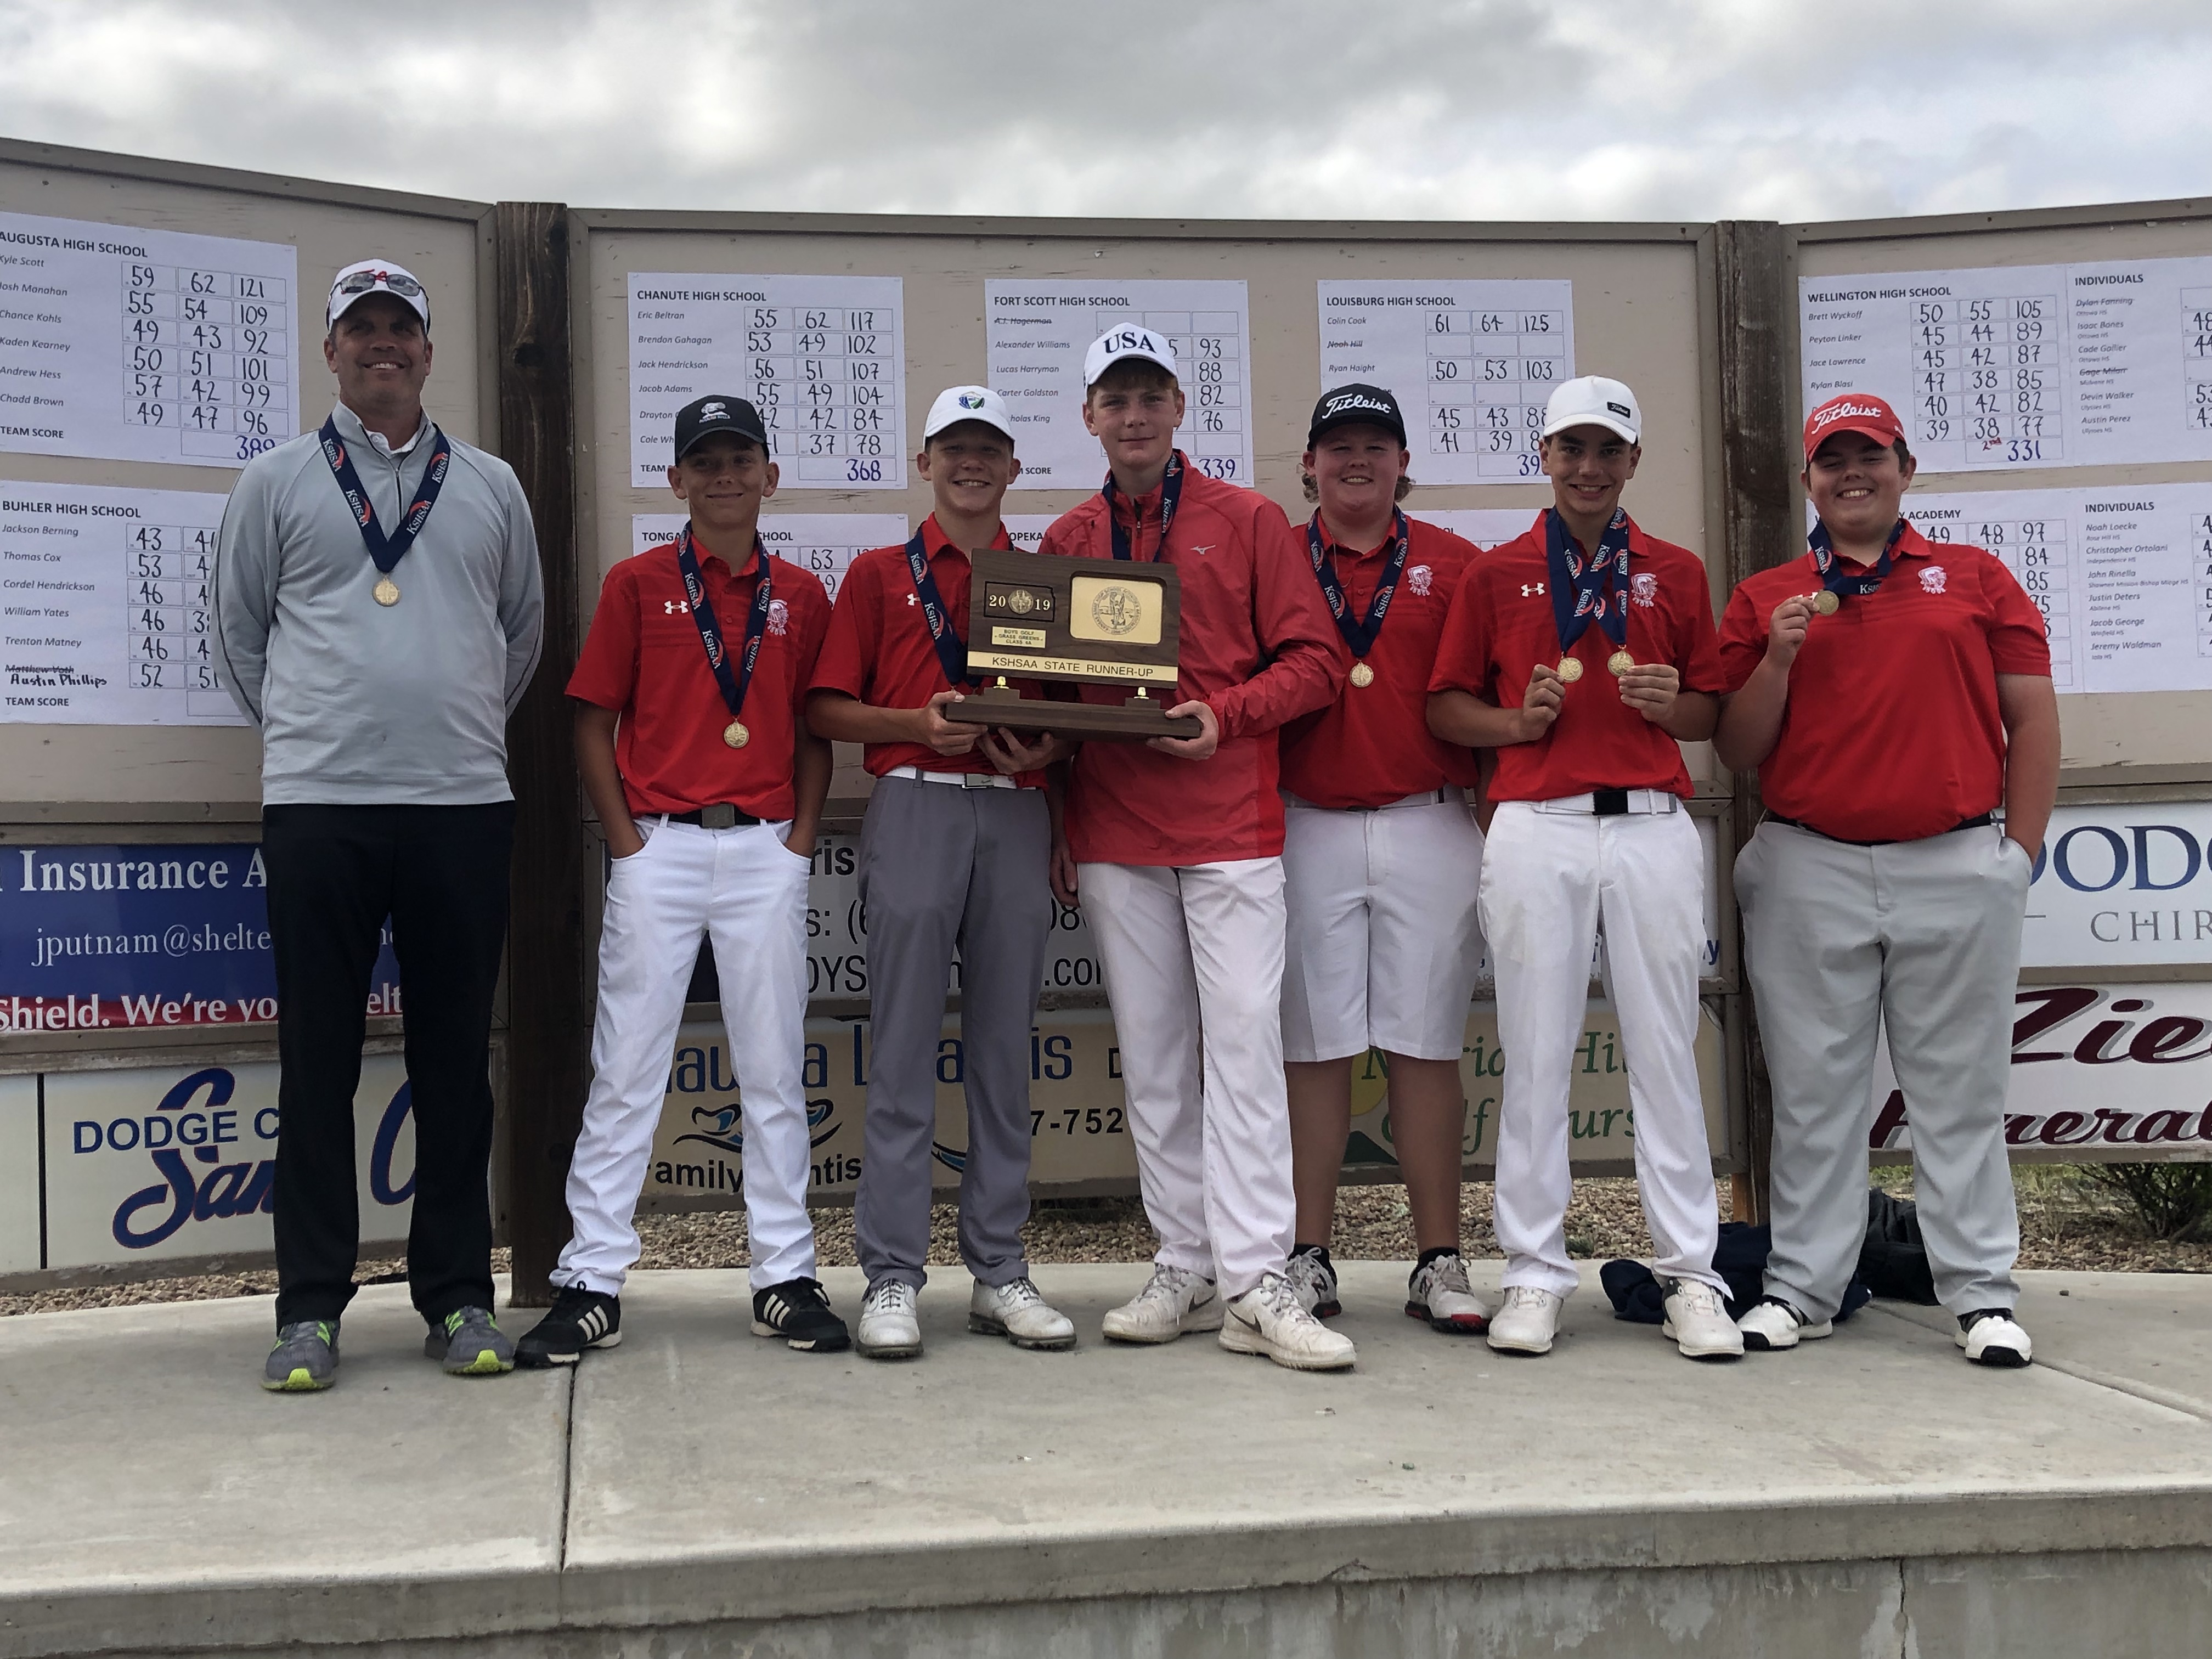 State 4A Golf 2019 Runners Up